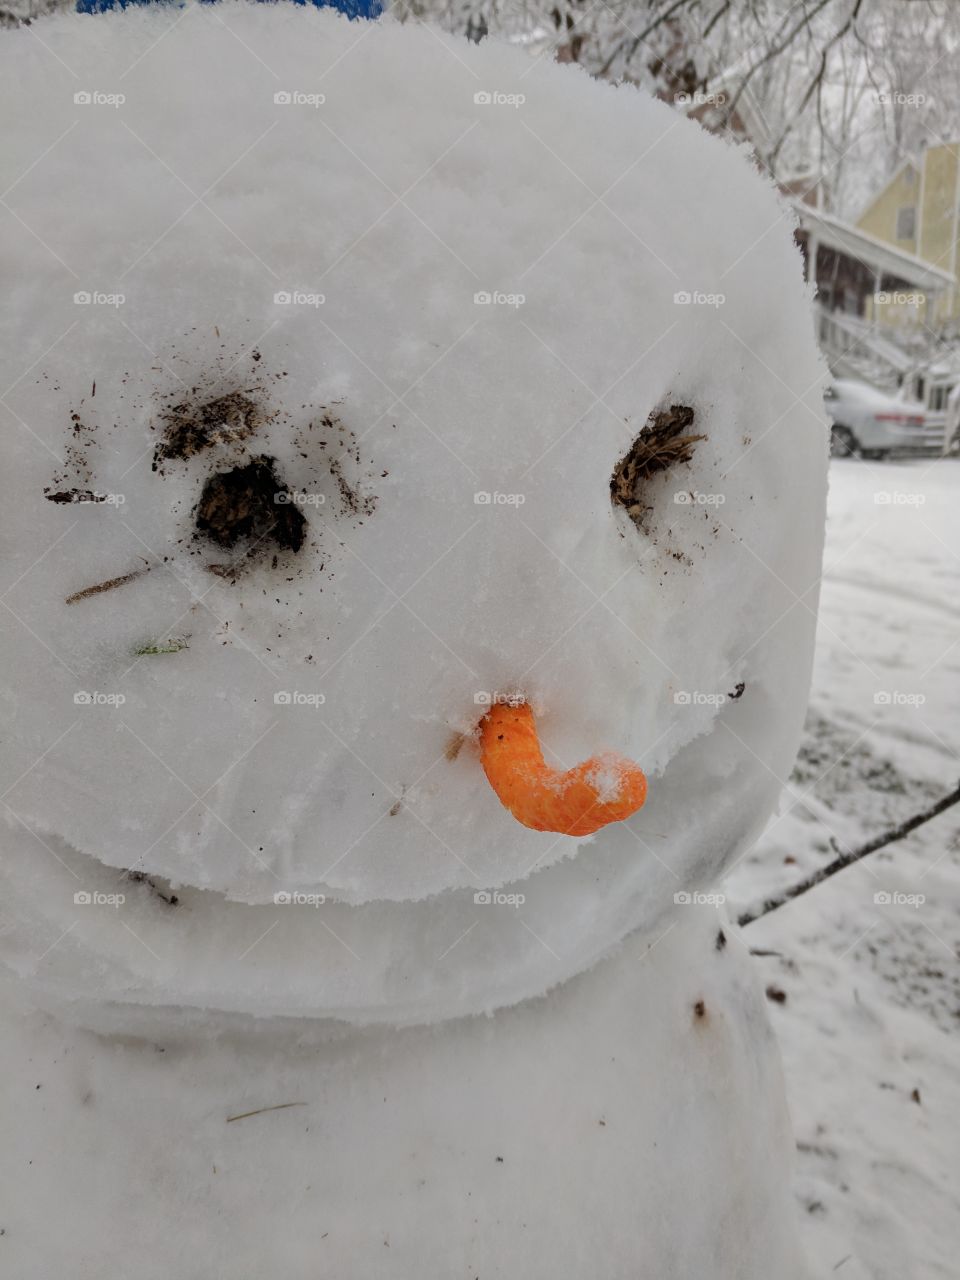 Snowman in the City